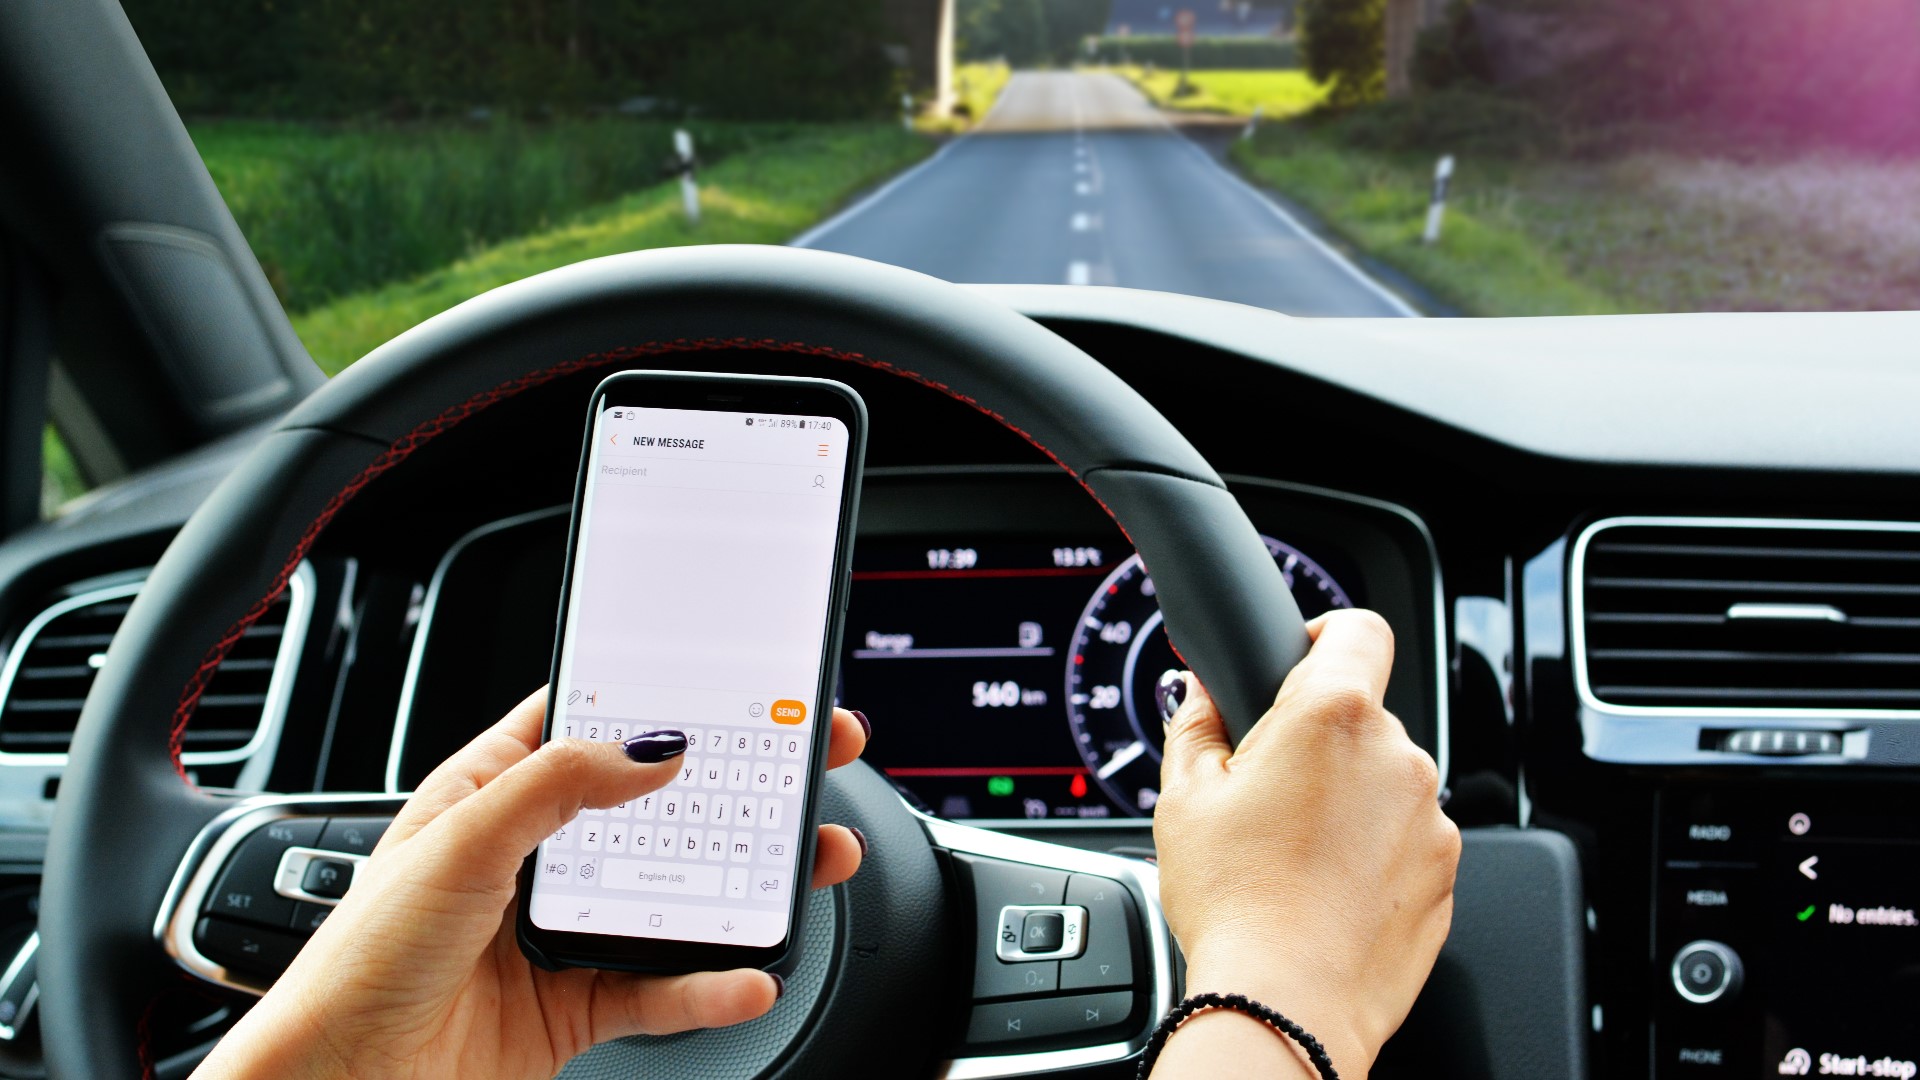 The enforcement of distracted driving in Oho is having an impact on young drivers and their insurance rates.